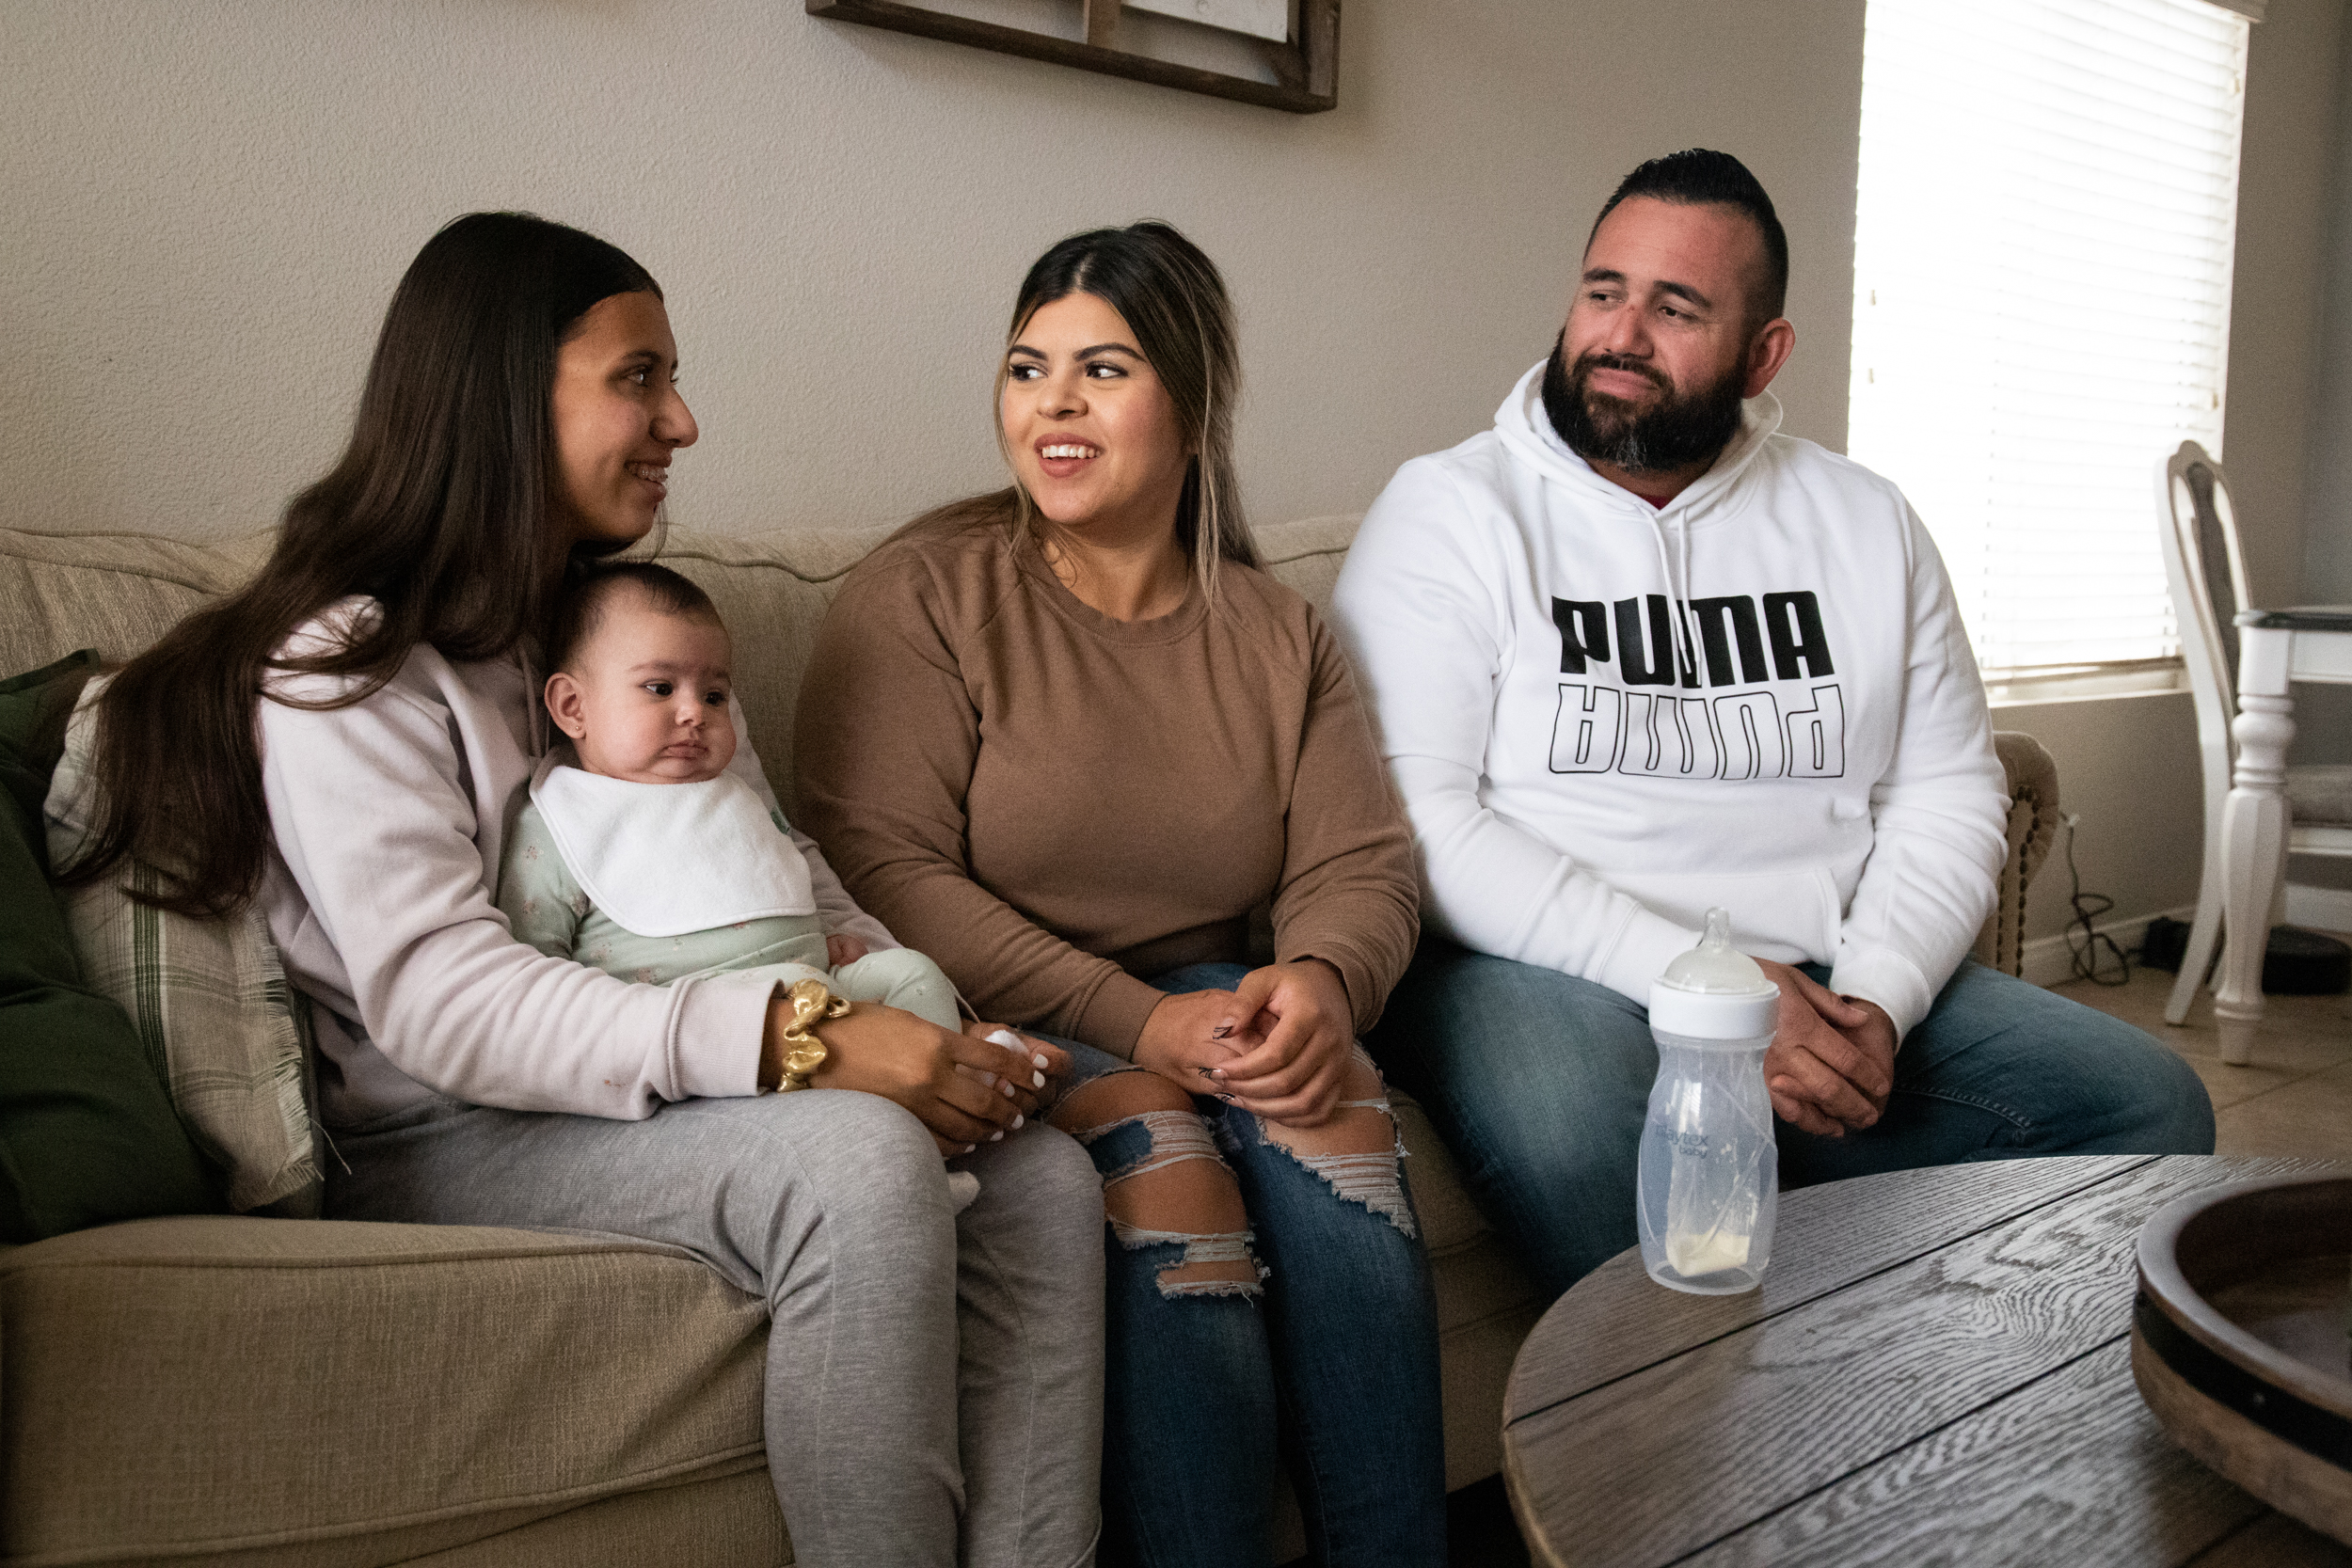 The Lopez-Beltran family moved to the city of Murrieta due to the high cost of living in San Diego. Dohney Castillo (far right) commutes daily to his job at Republic Services in Chula Vista. / Photo by Adriana Heldiz